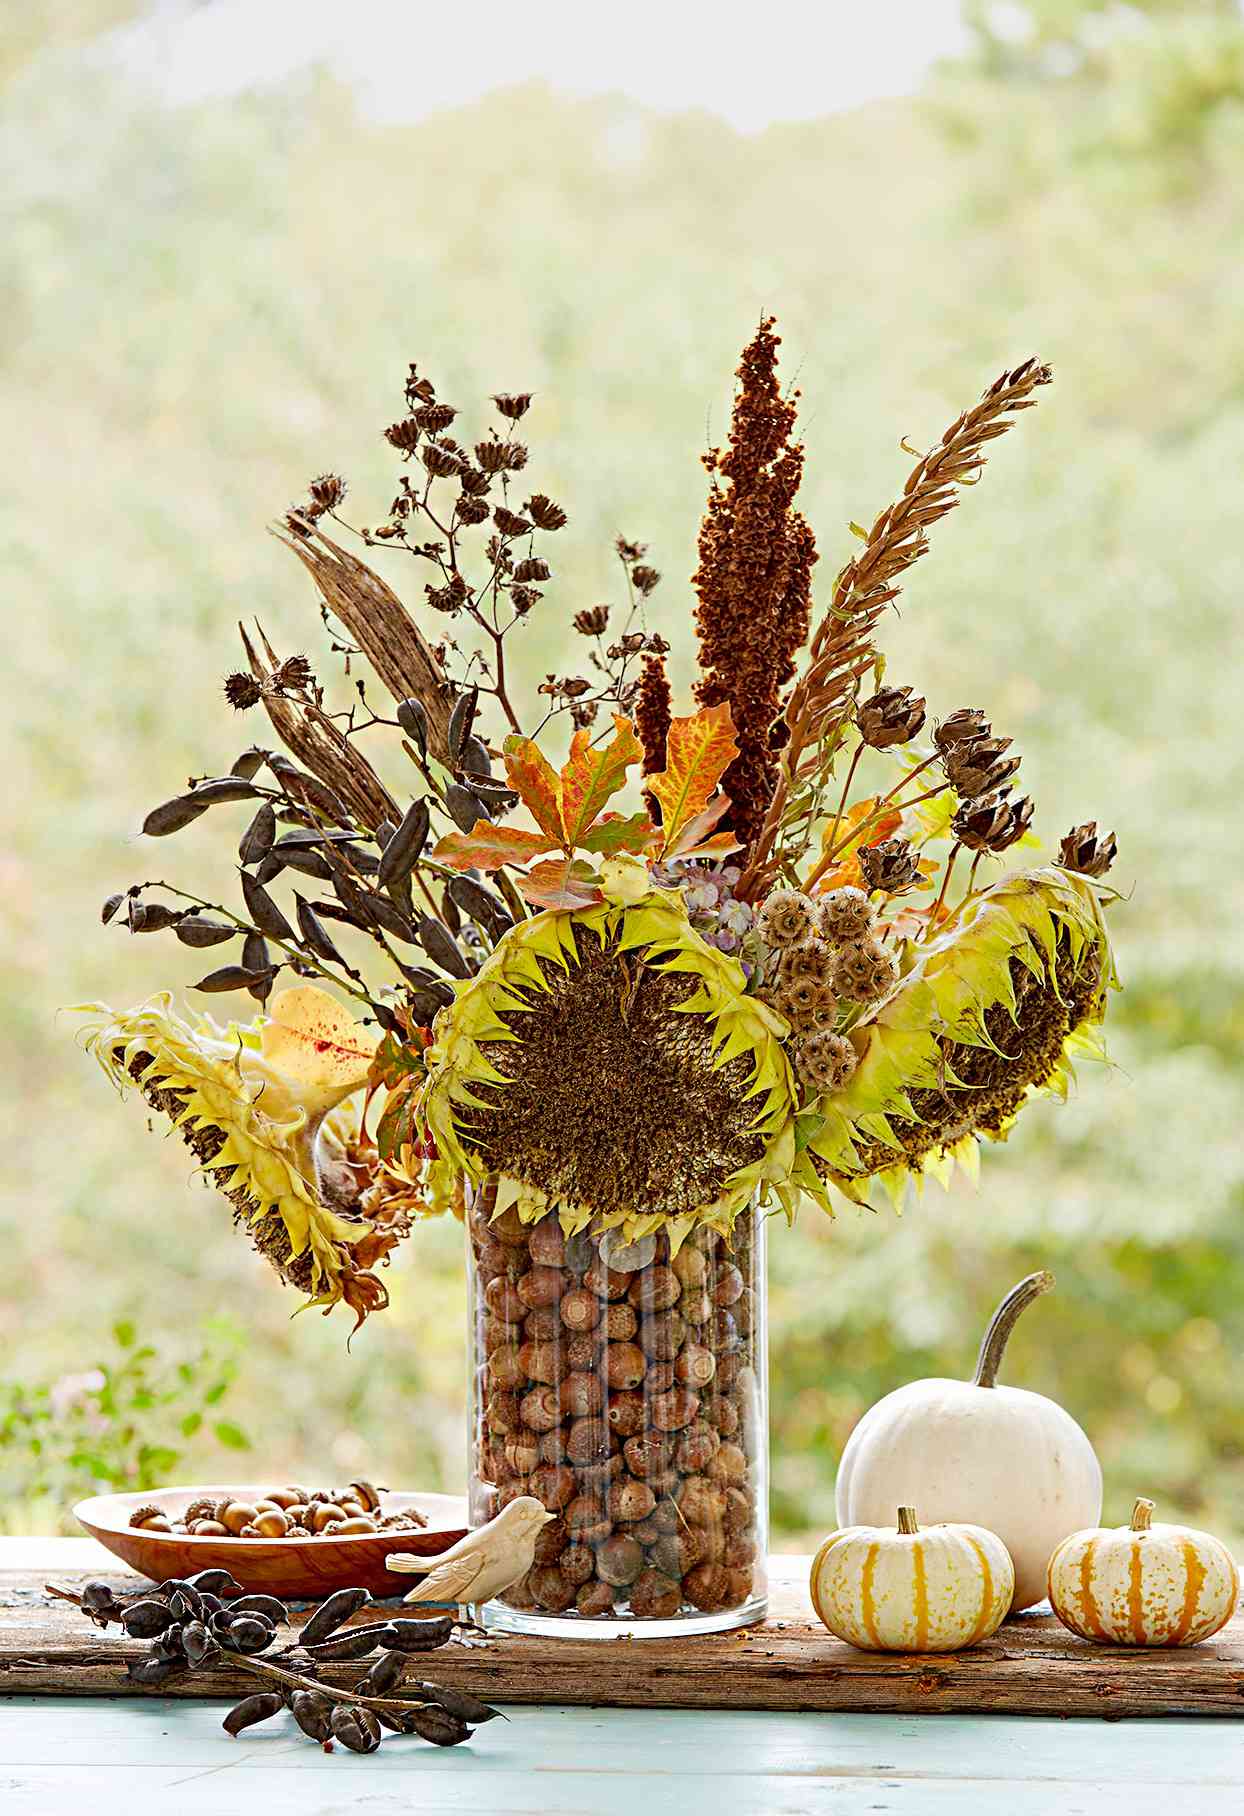 Vase with sunflowers and other plants